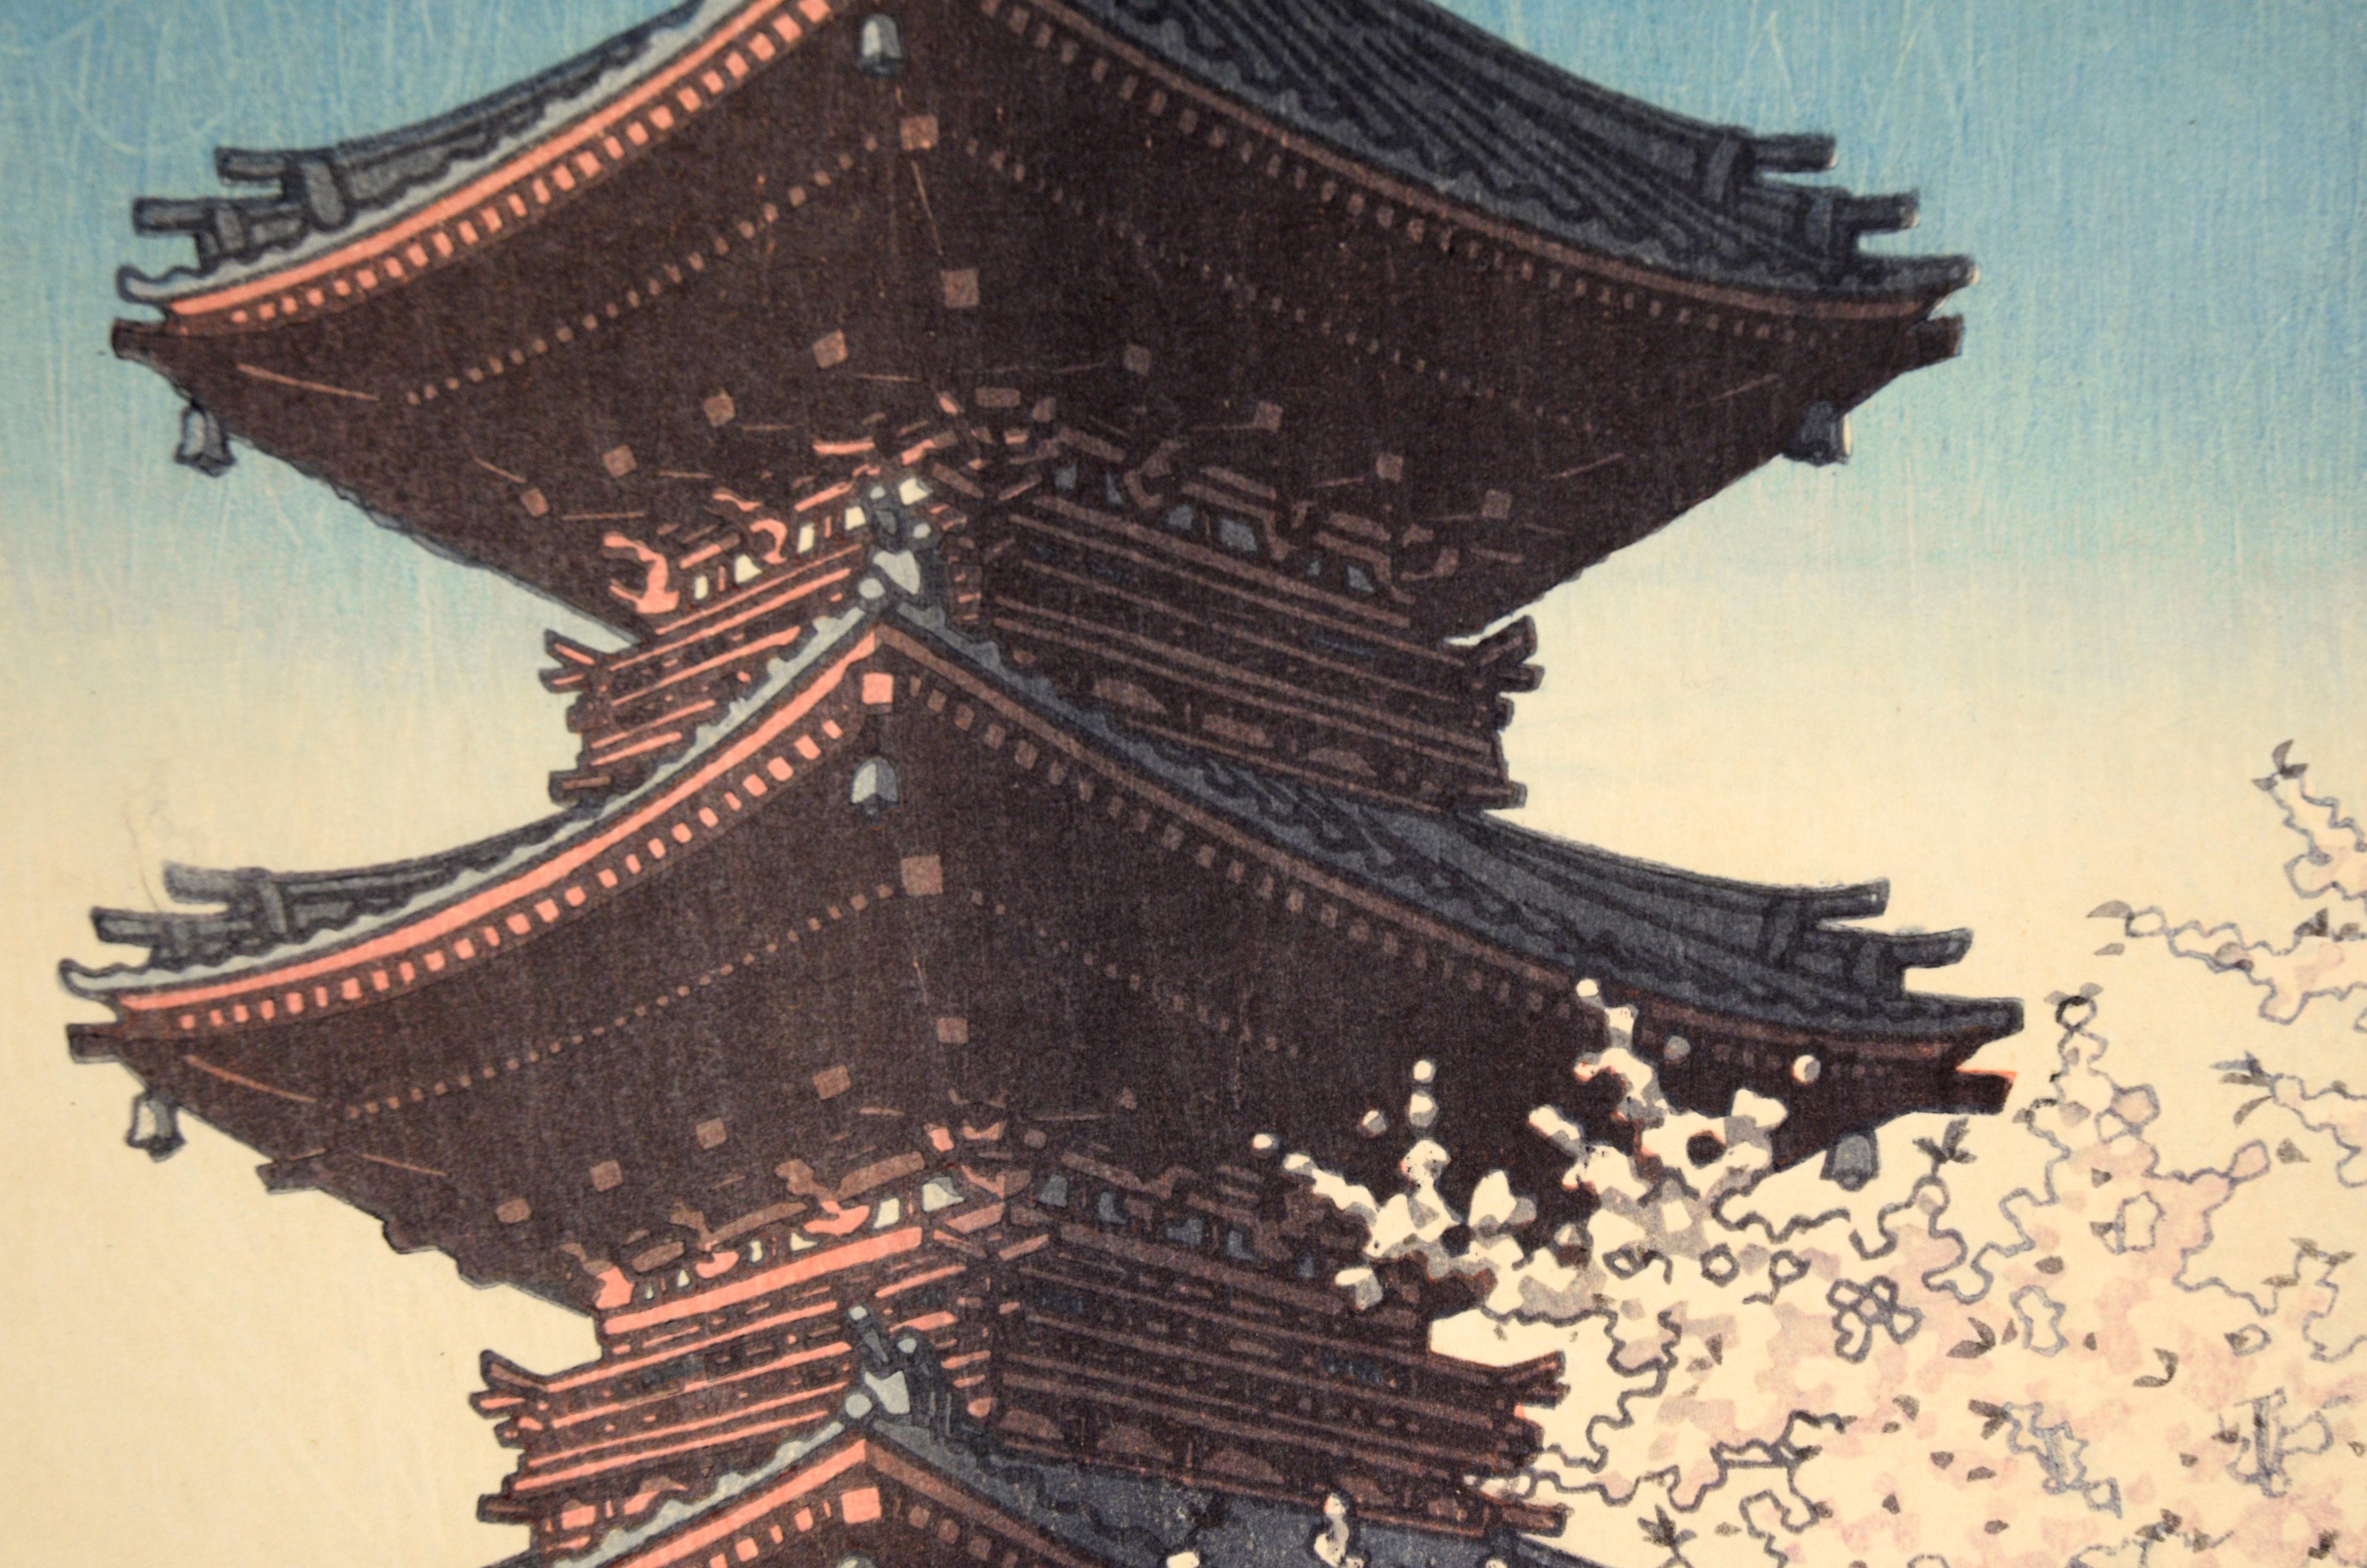 Spring Evening, Ueno Toshogu Shrine - Woodblock Print with First Edition Seal - Beige Landscape Print by Kawase Hasui